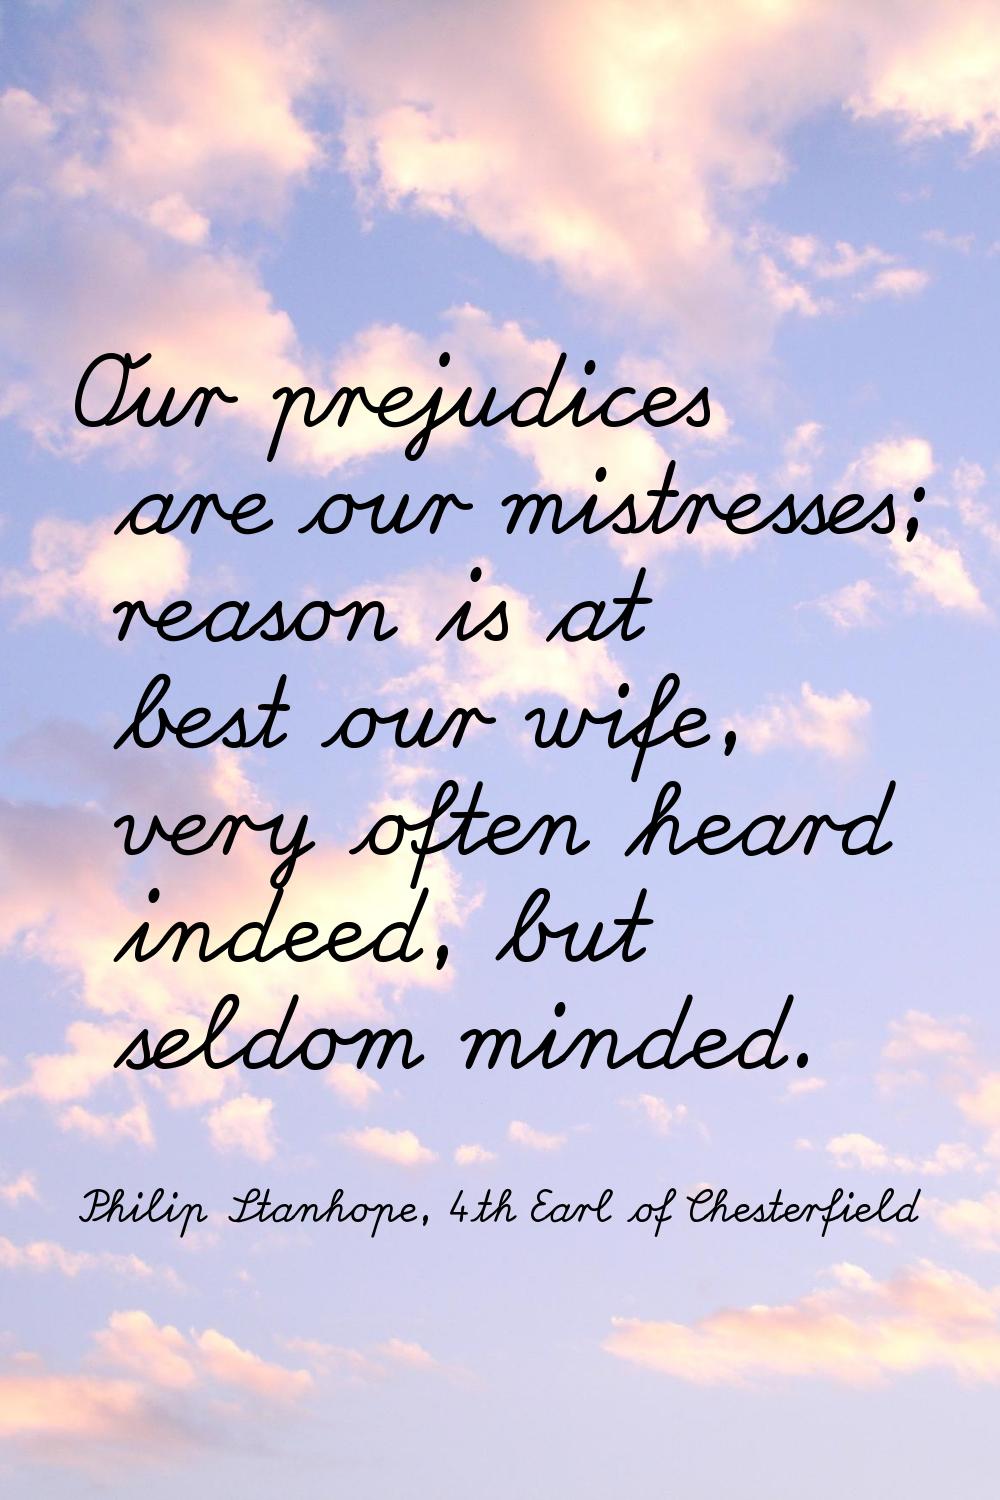 Our prejudices are our mistresses; reason is at best our wife, very often heard indeed, but seldom 